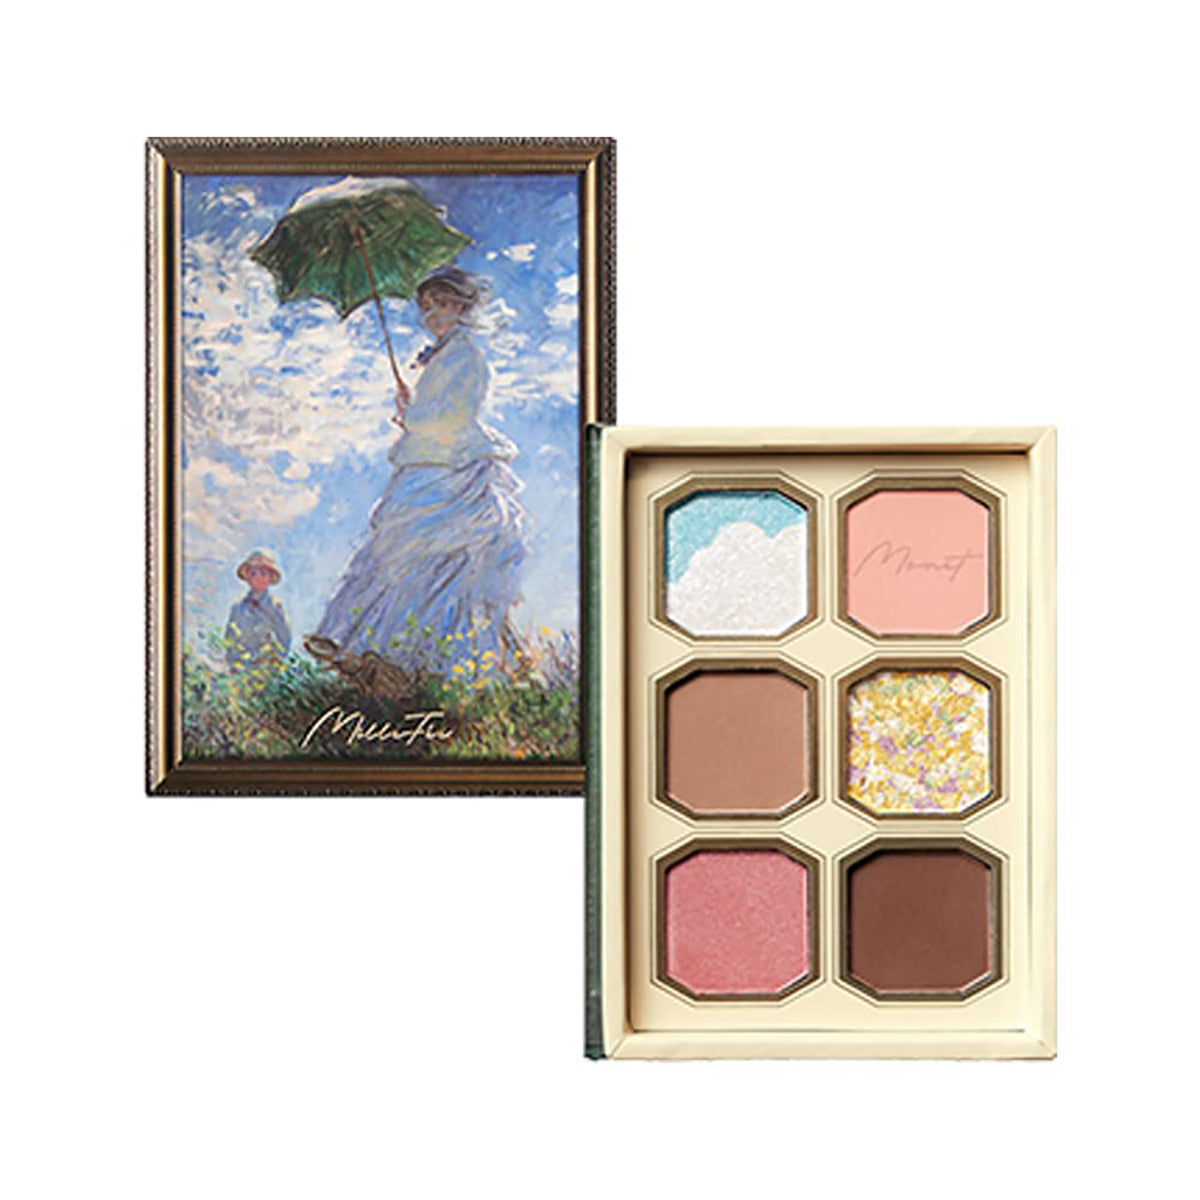 Painting Eyeshadow Palette-04 Woman With A Parasol-1-Millefee-Makeup-cosmetics